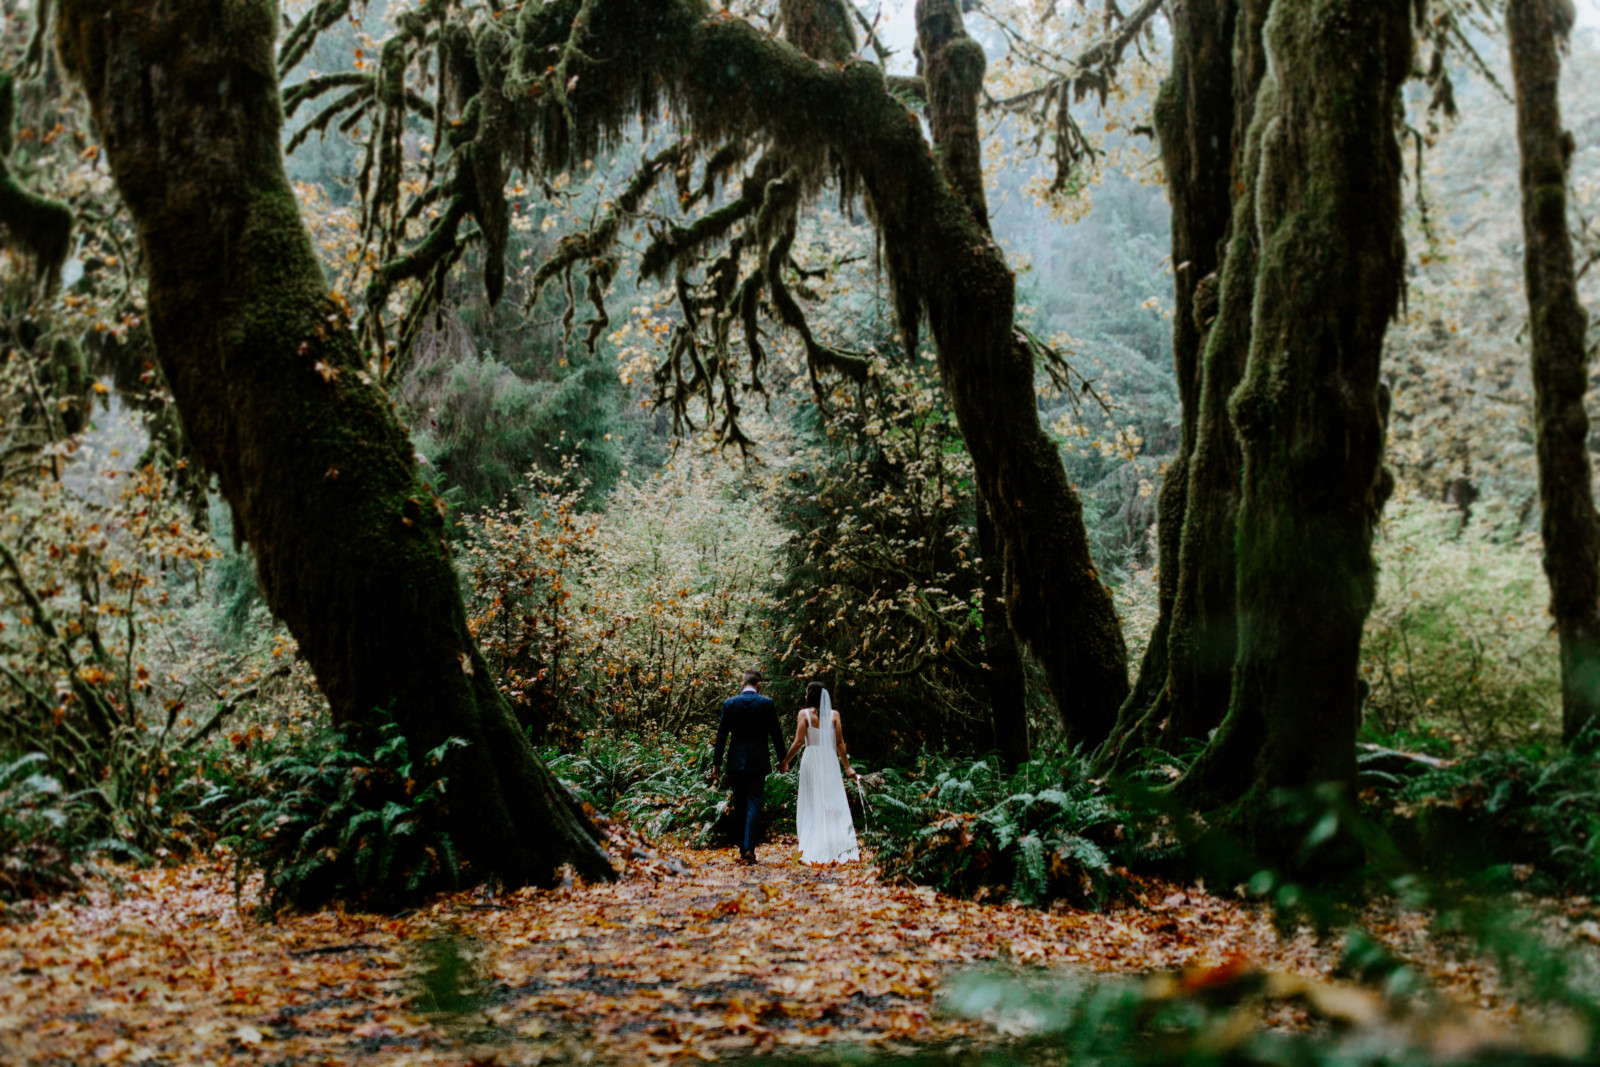 Corey and Mollie walking through the woods. Elopement photography in the Olympic National Park by Sienna Plus Josh.